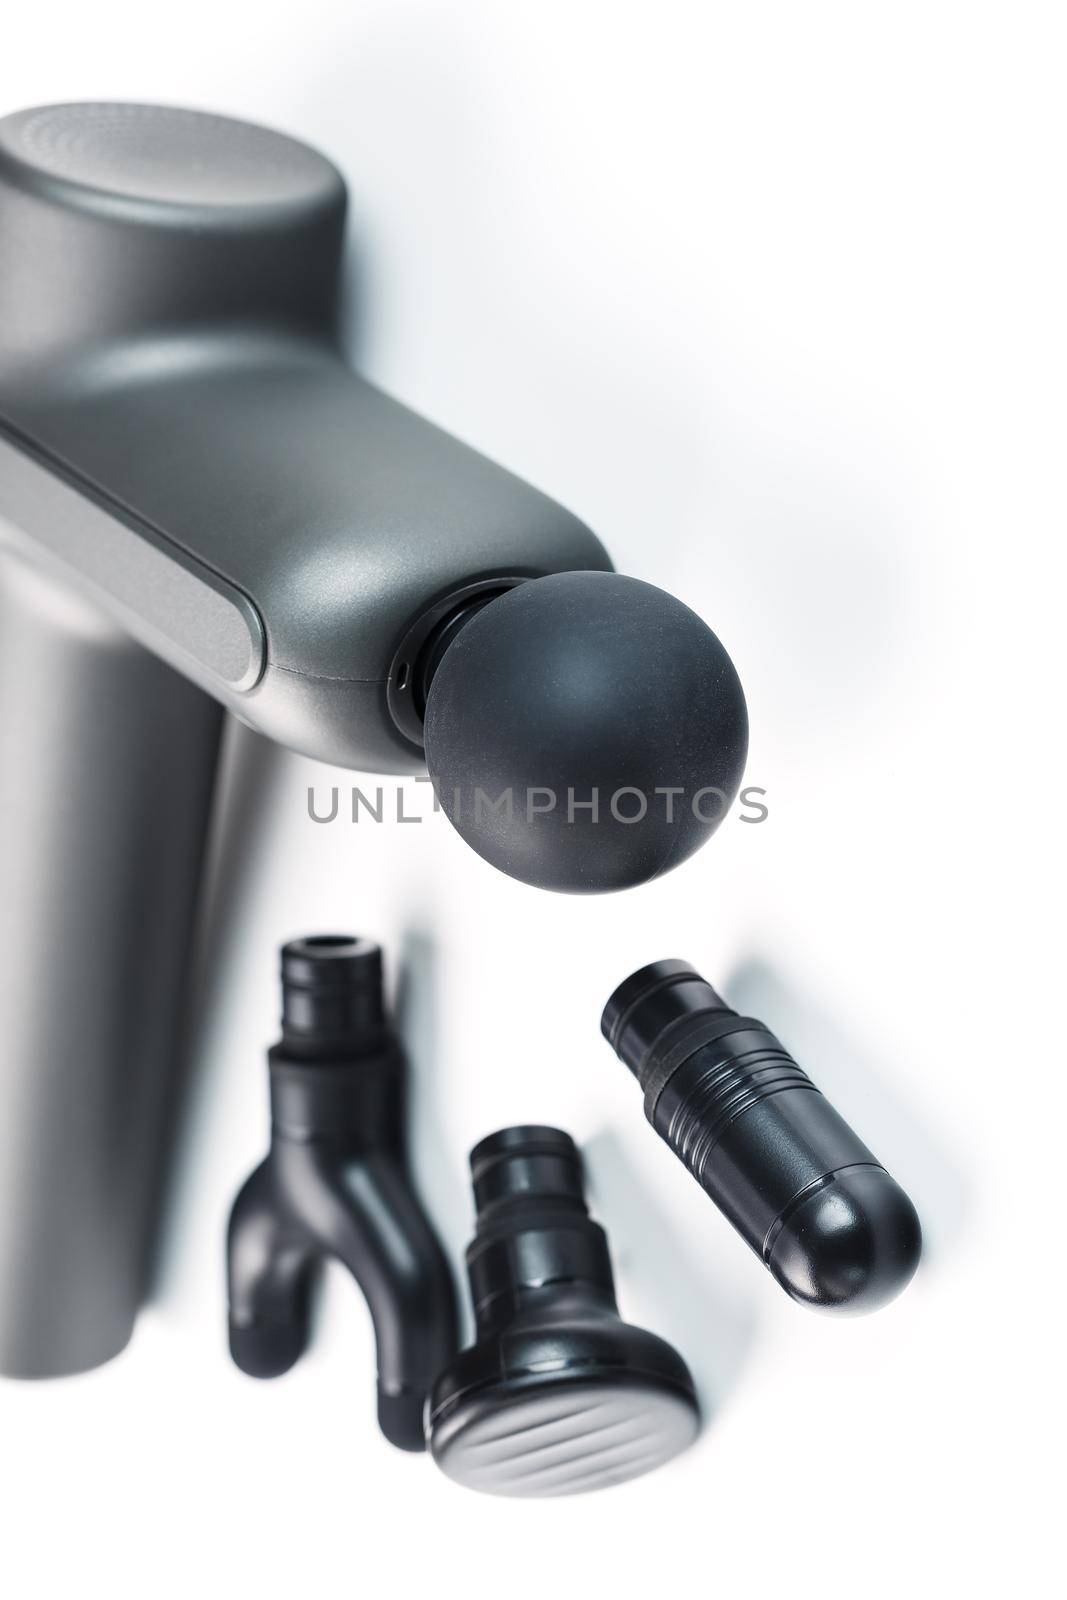 Electric body massager with various attachments on a white background. by AlexGrec